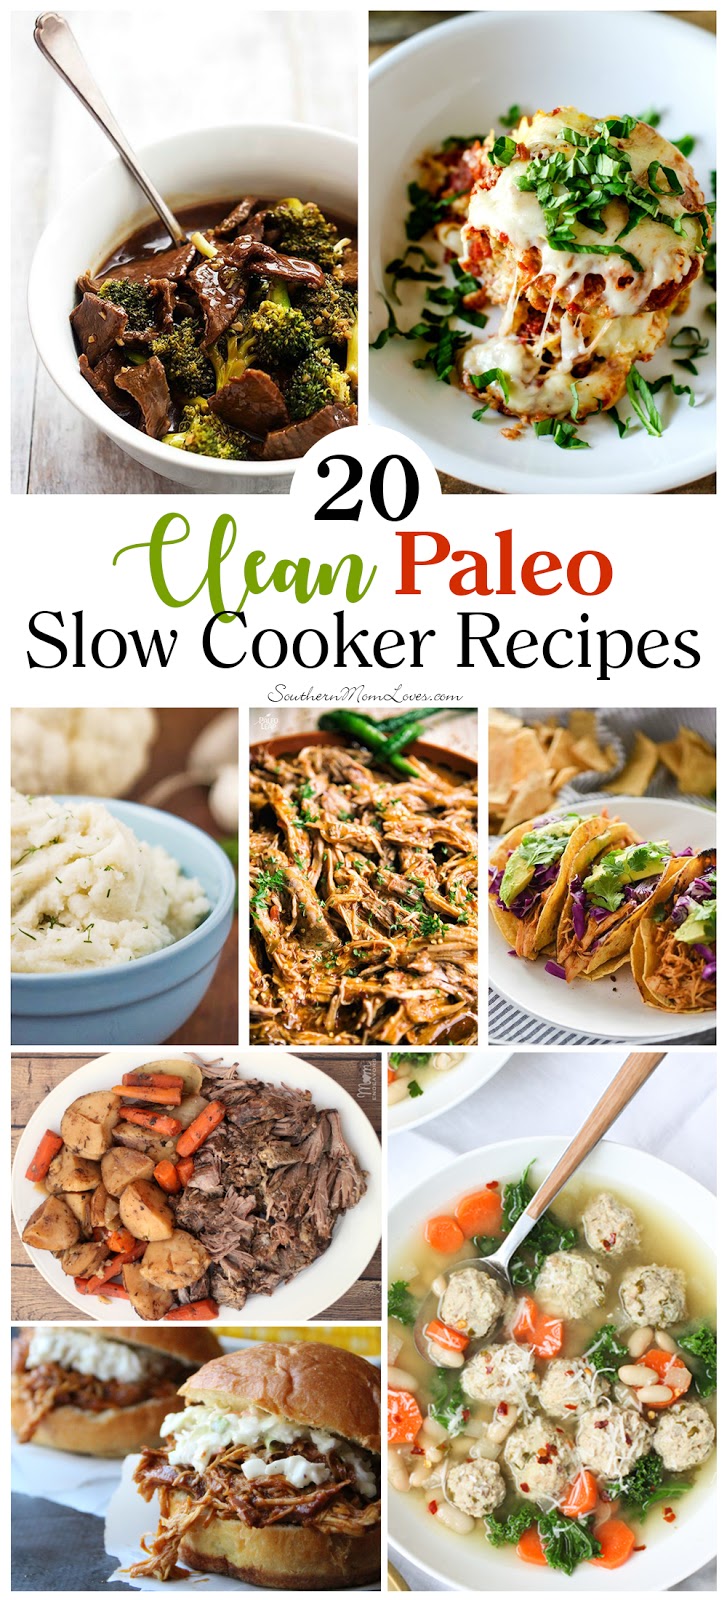 Southern Mom Loves: 20 Paleo Slow Cooker Recipes